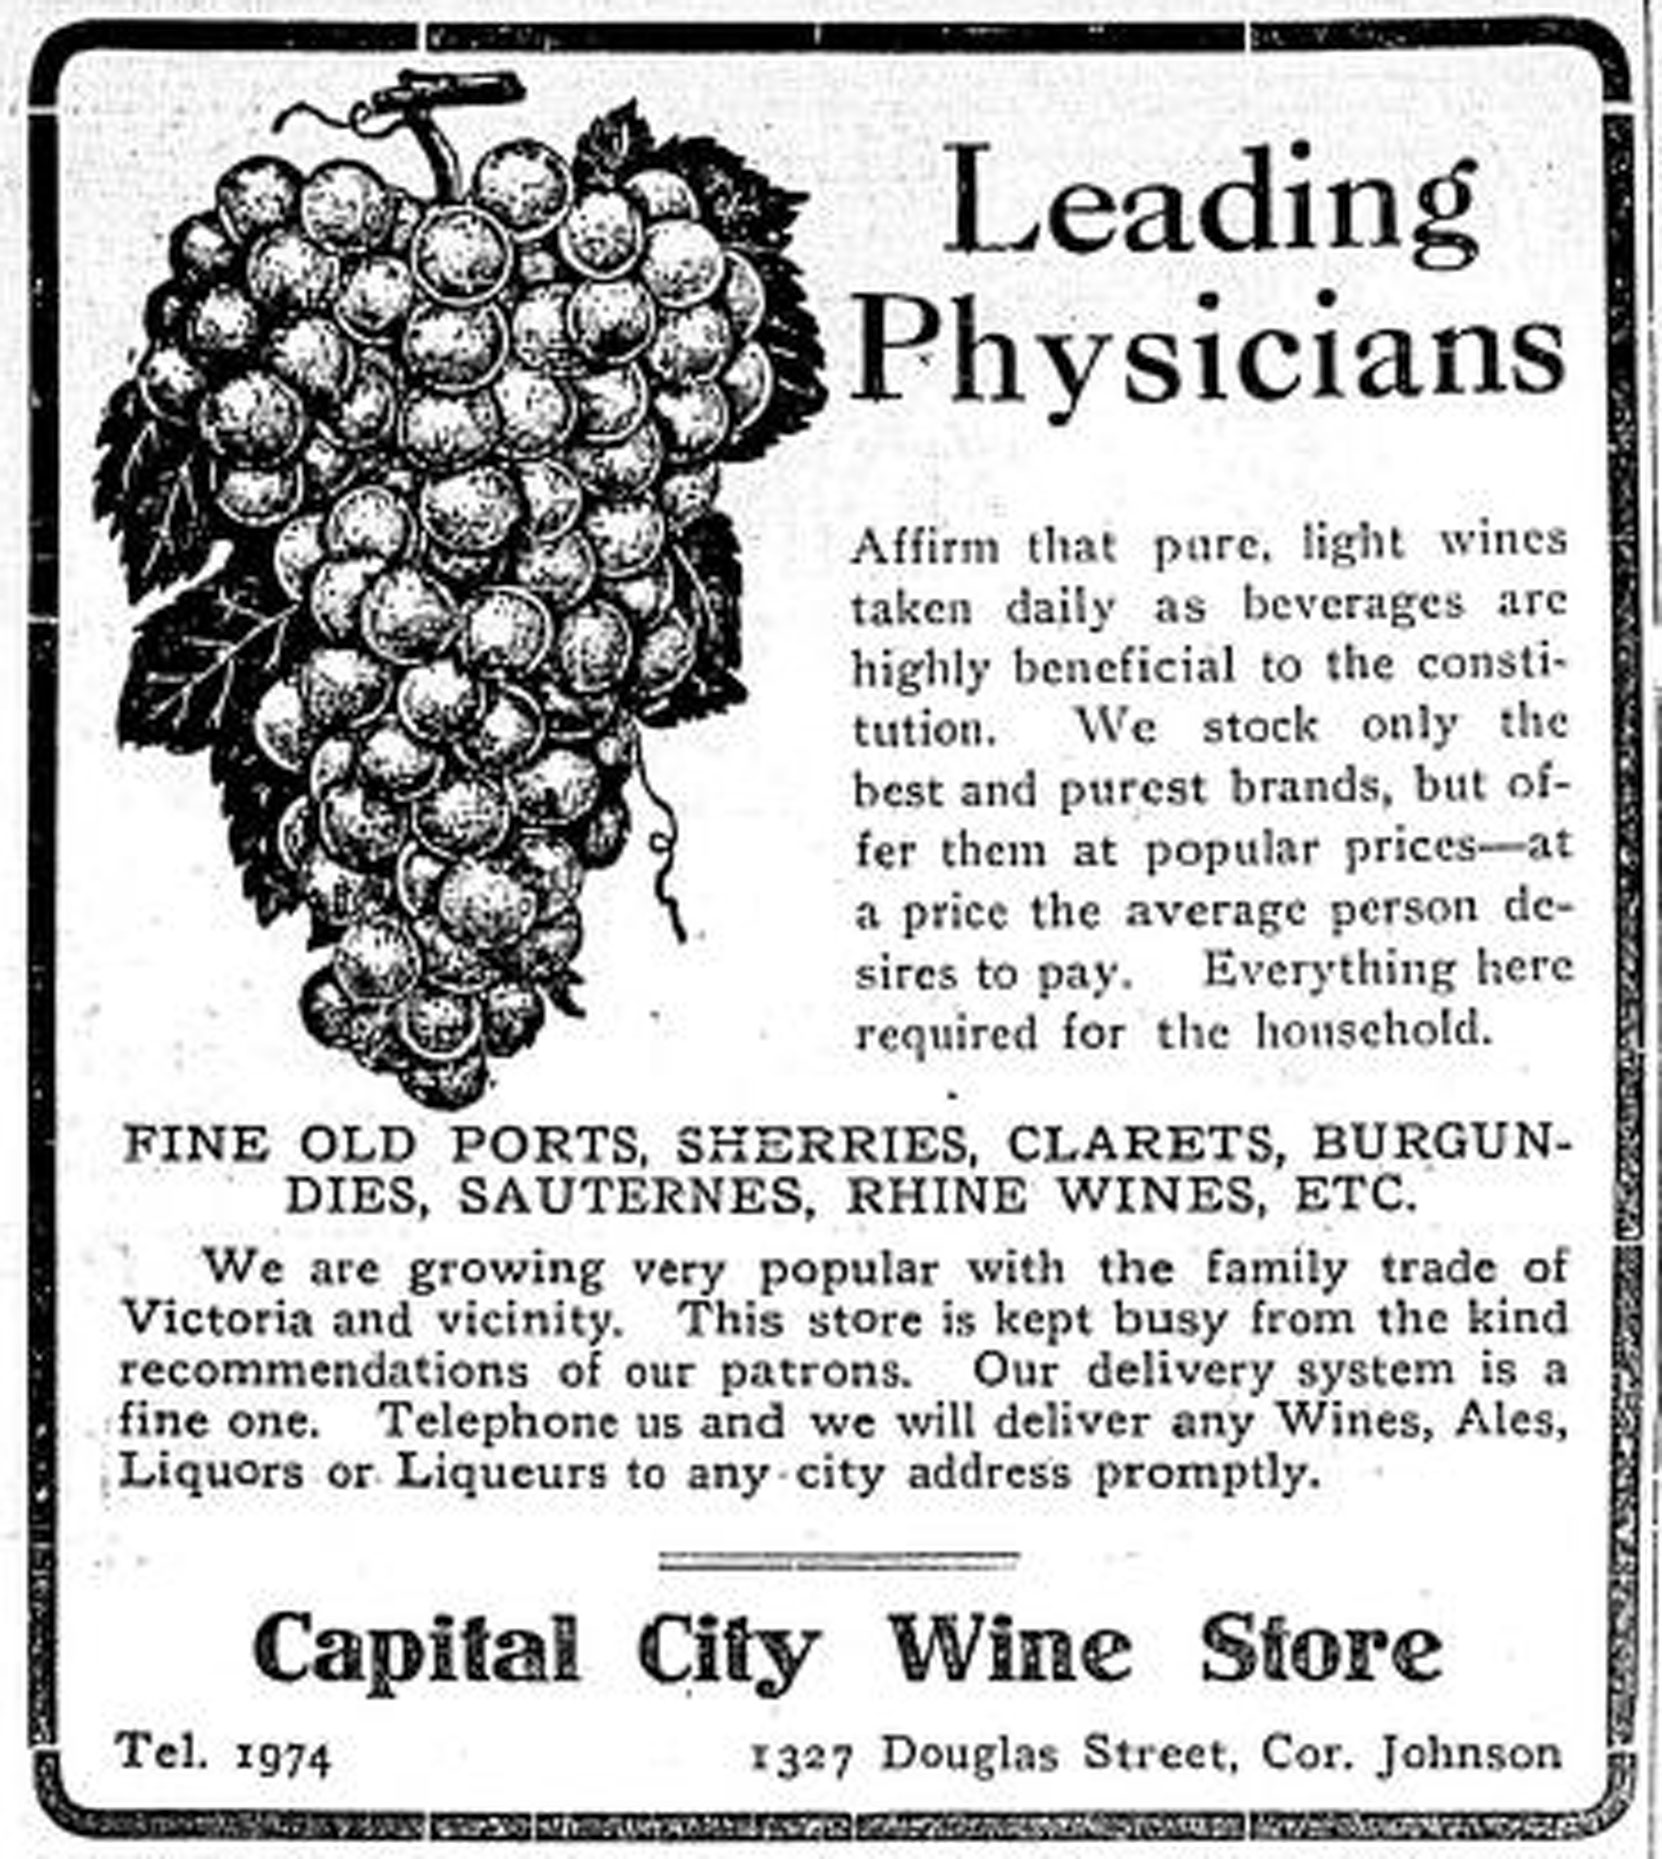 1910 advertisement for the Capital City Wine Store, 1327 Douglas Street (Victoria Online Sightseeing Tours collection)